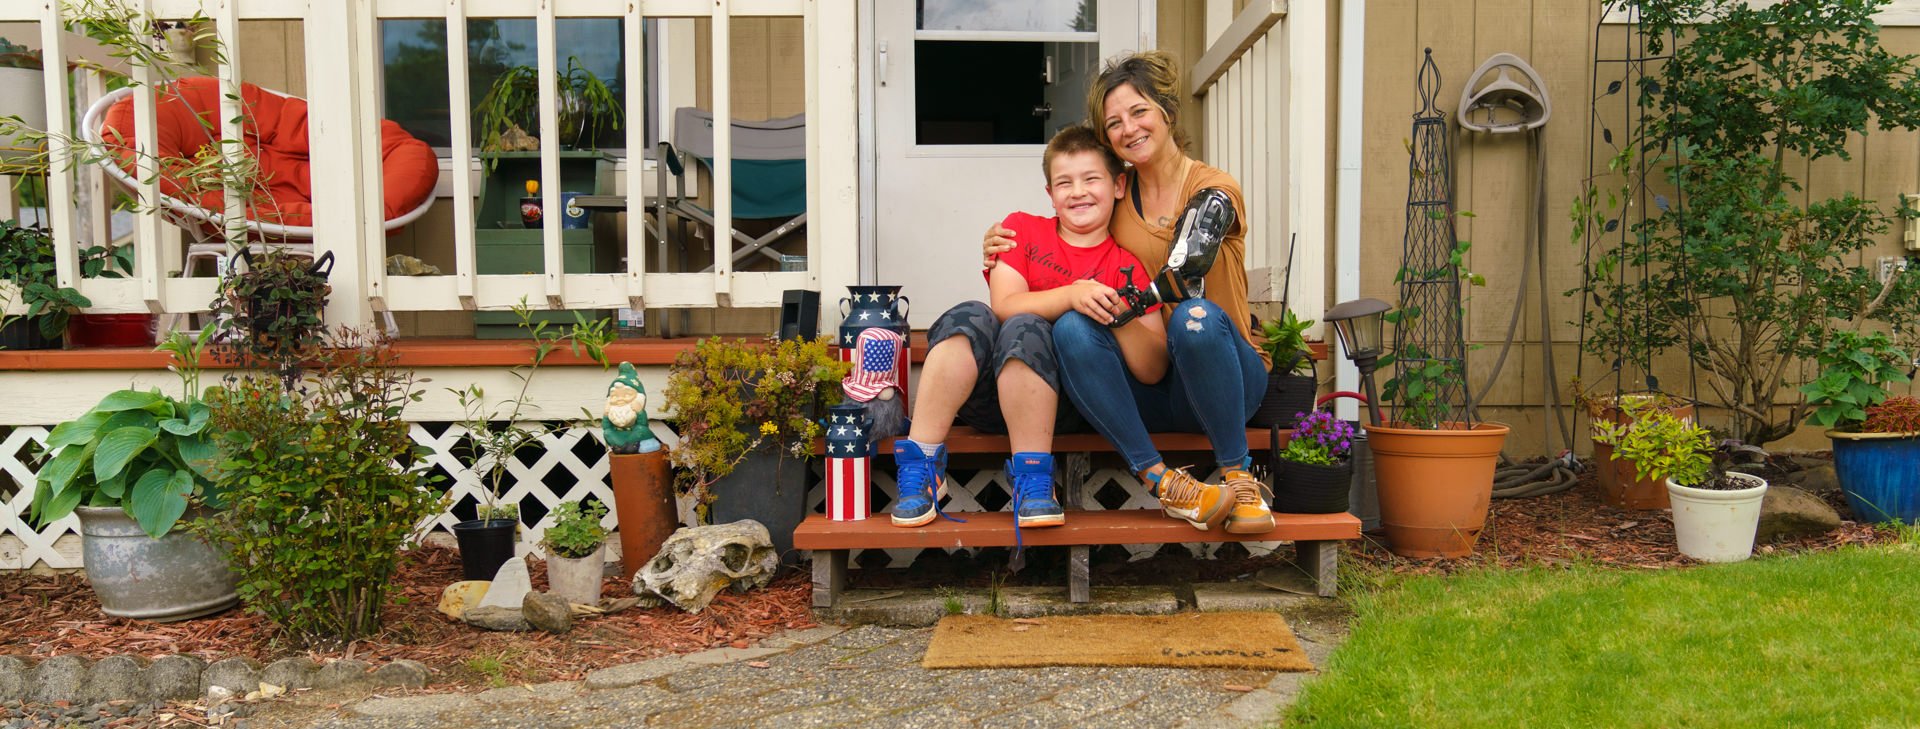 Wendi Parker and son Hank hanging out on front porch